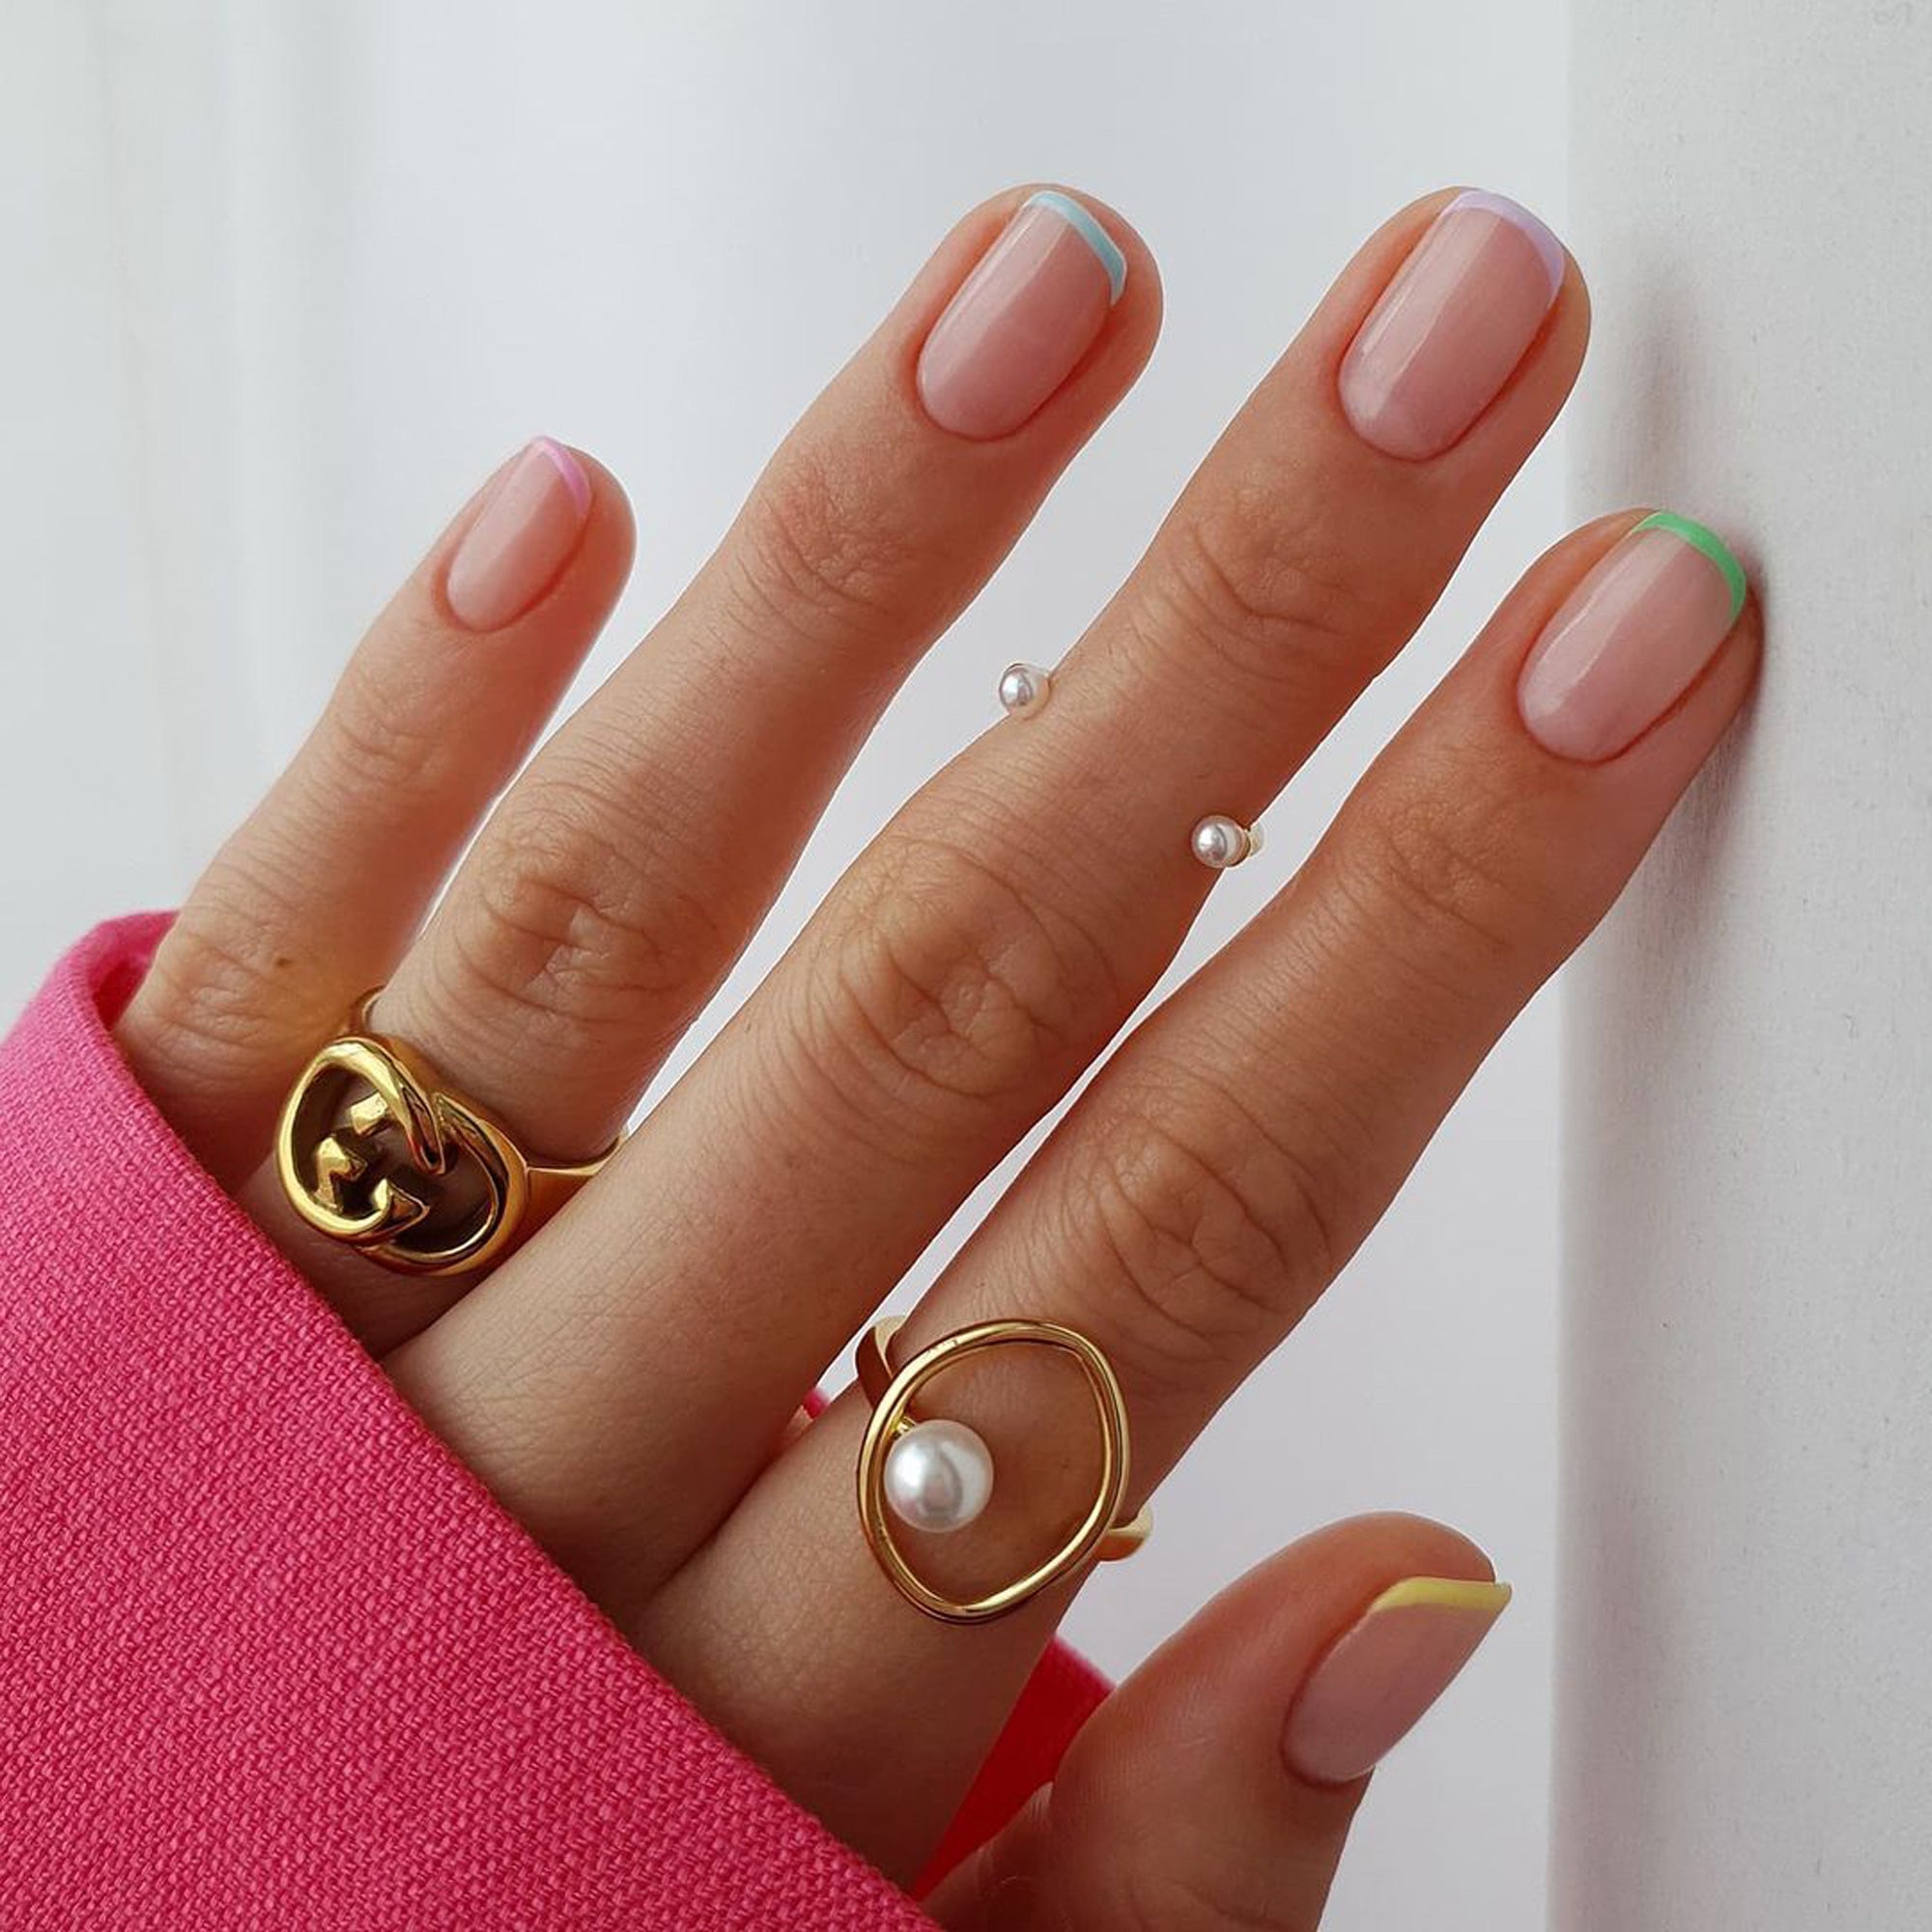 Structured Gel Manicures Are the Underrated Trick Every Nail Biter Needs to  Know | Allure